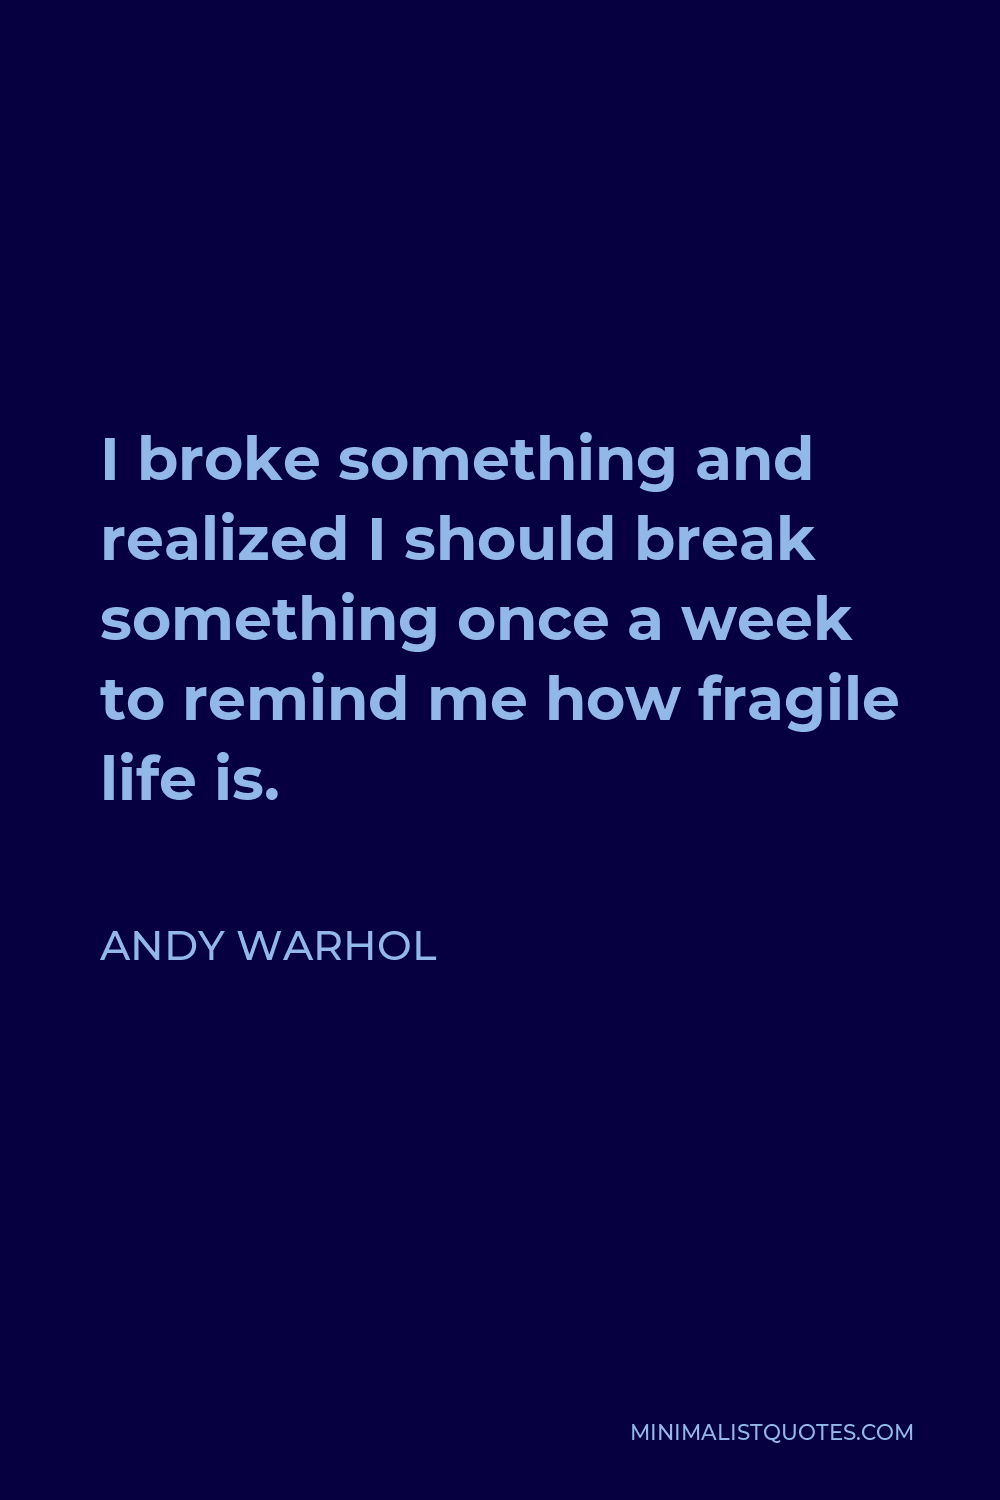 Andy Warhol Quote - I broke something and realized I should break something once a week to remind me how fragile life is.